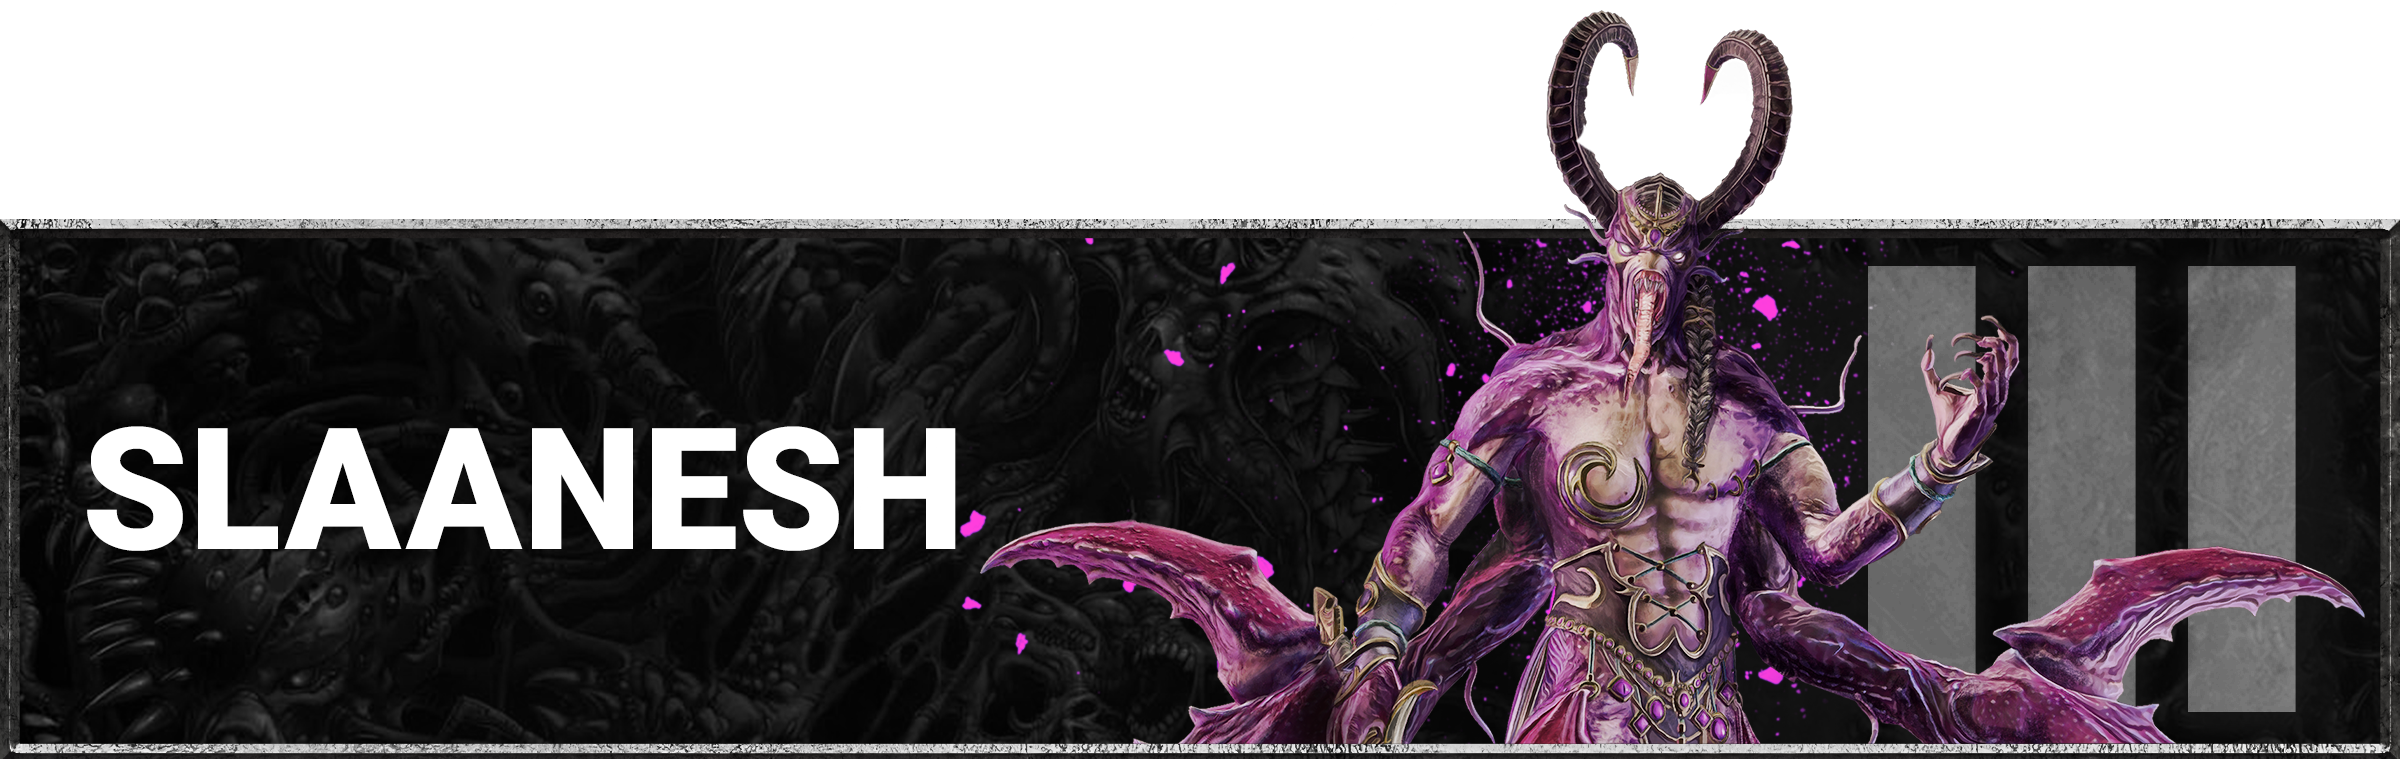 Balance changes to the SLAANESH race and factions, available to owners of Total War: WARHAMMER III.